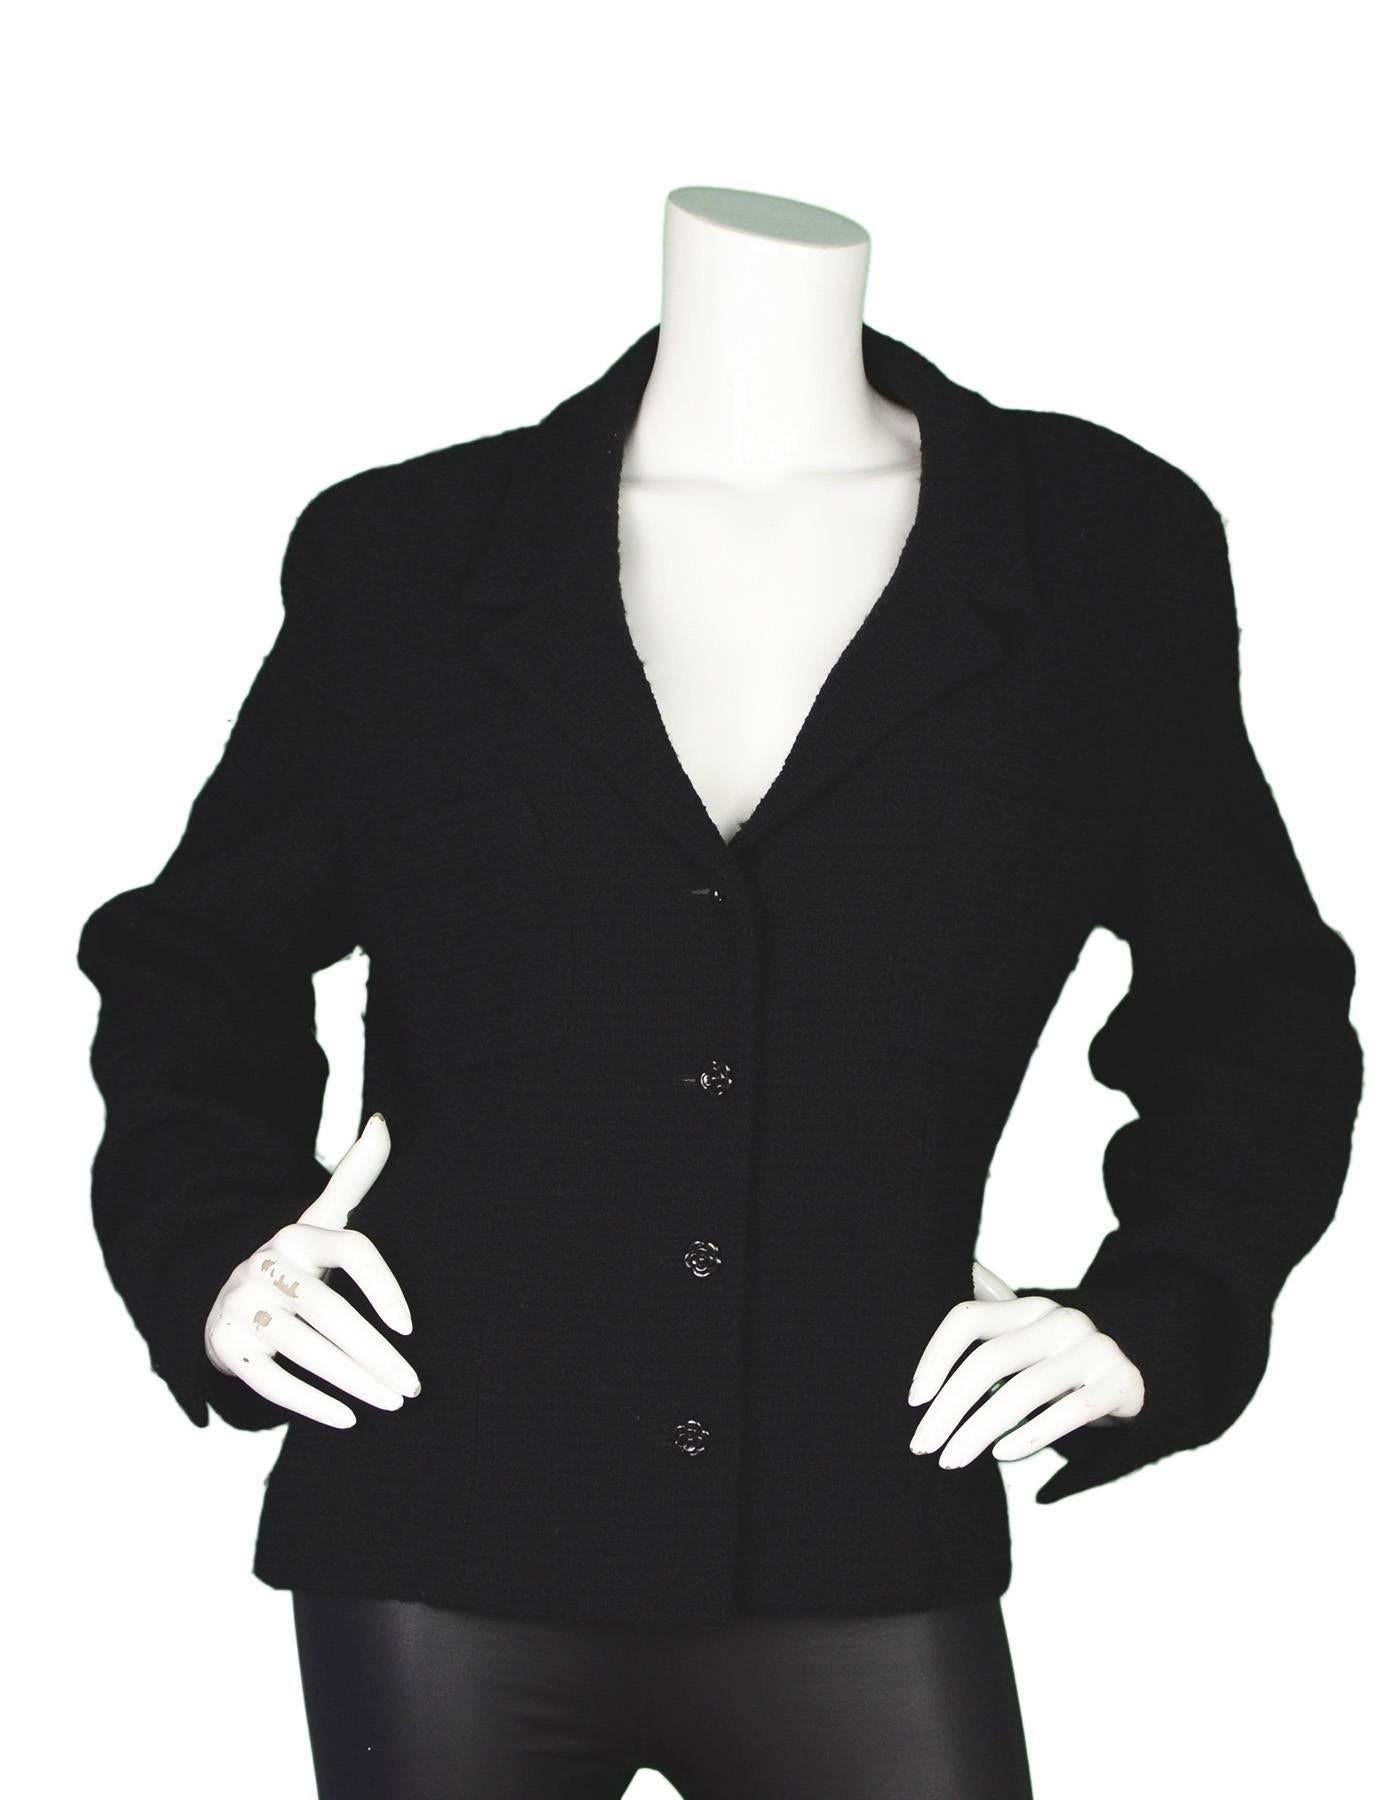 Chanel Black Boucle Jacket
Features camelia button detailing

Made In: France
Year of Production: 2002
Color: Black 
Composition: 85% wool, 15% angora
Lining: Black, 95% silk, 5% spandex
Closure/Opening: Button down front
Exterior Pockets: Two